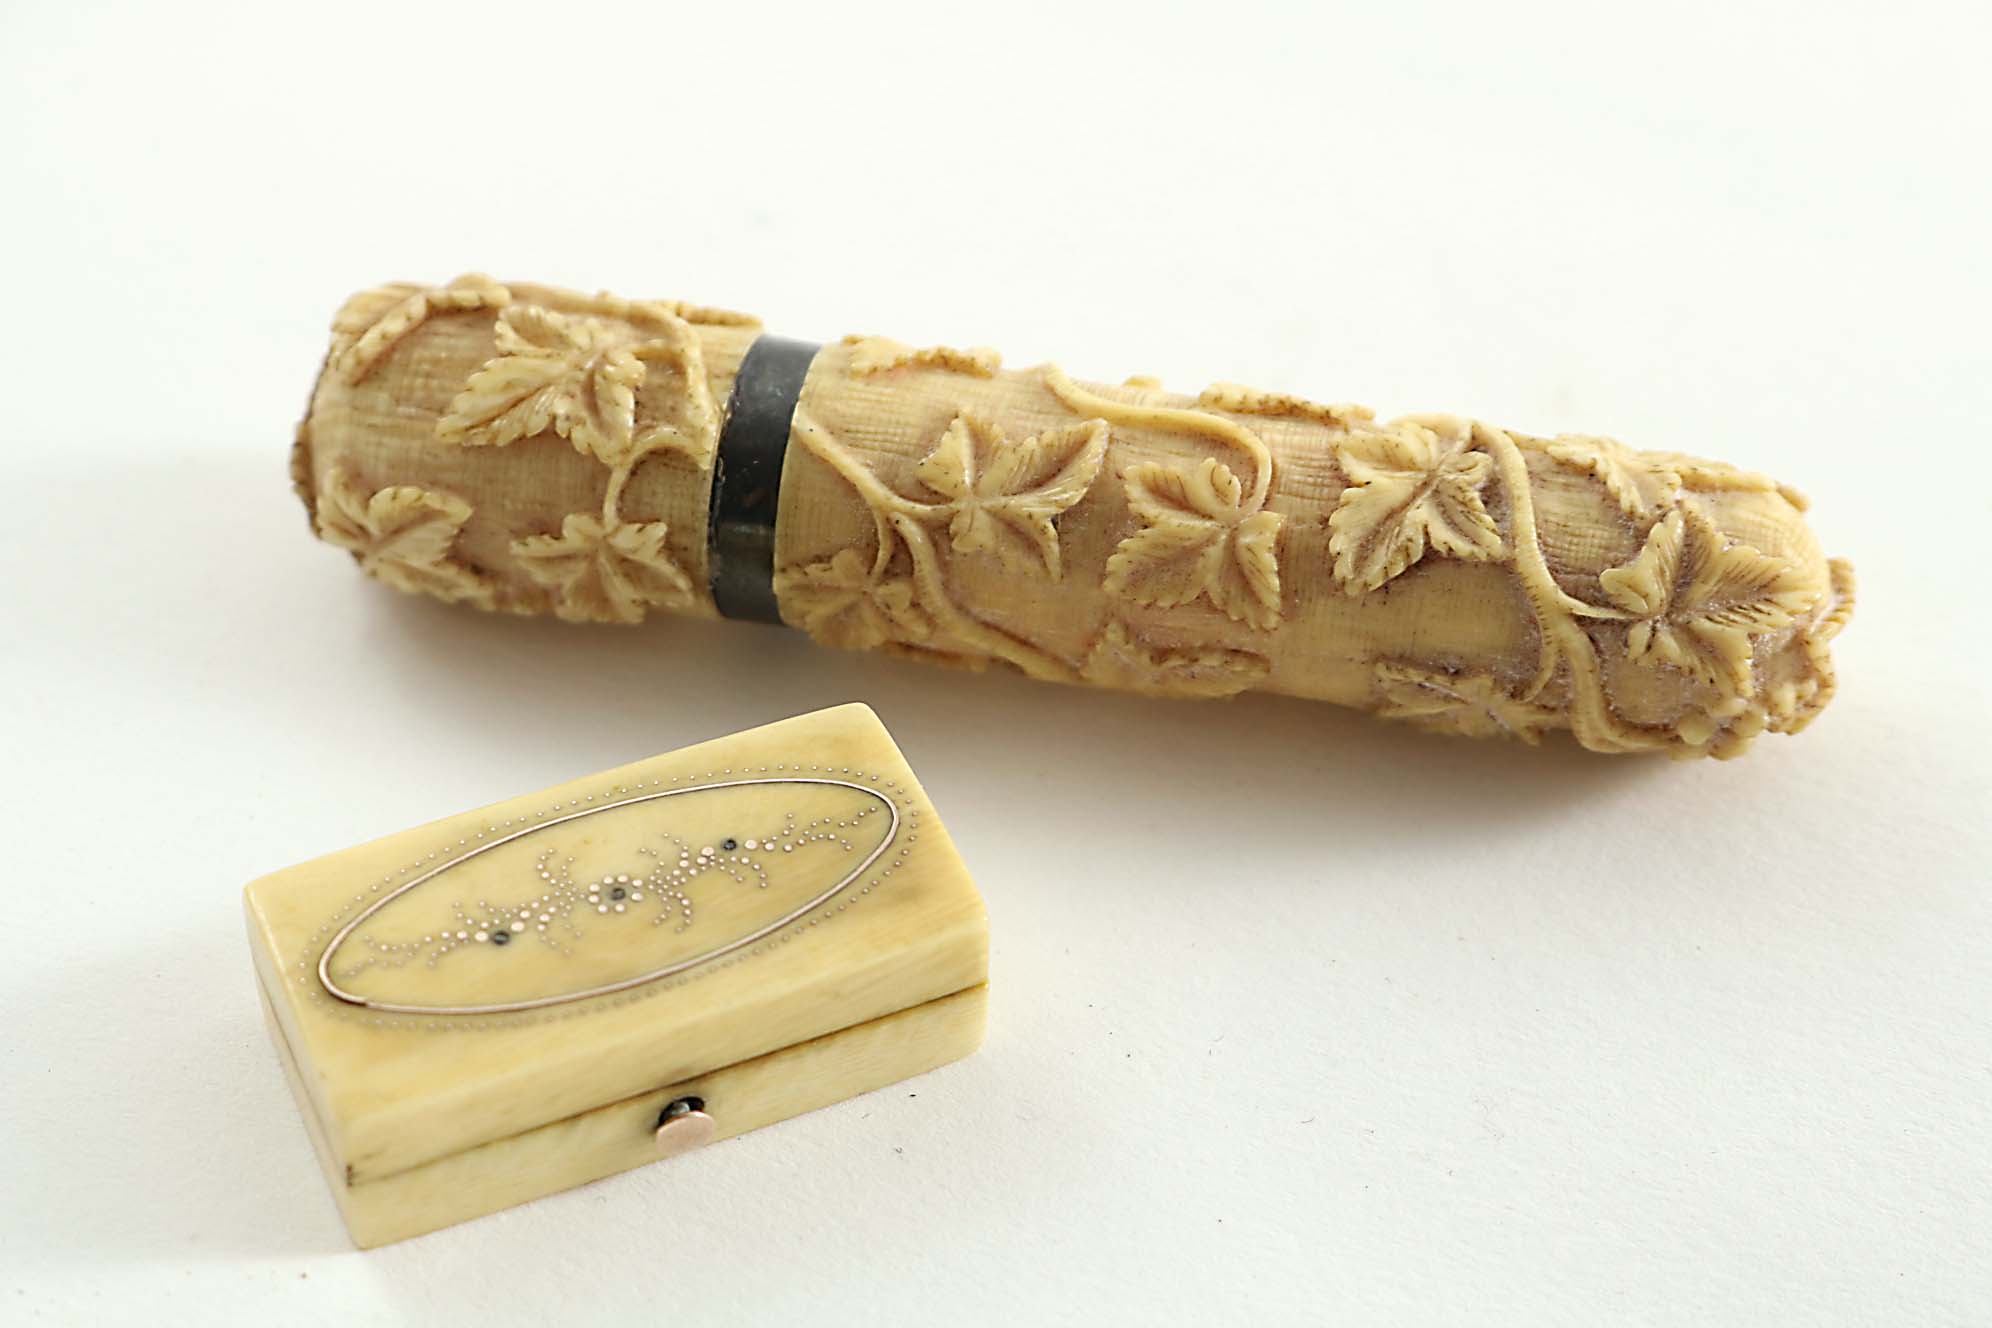 A GEORGE III GOLD-MOUNTED IVORY VINAIGRETTE with pique-work on the cover and a carved ivory needle